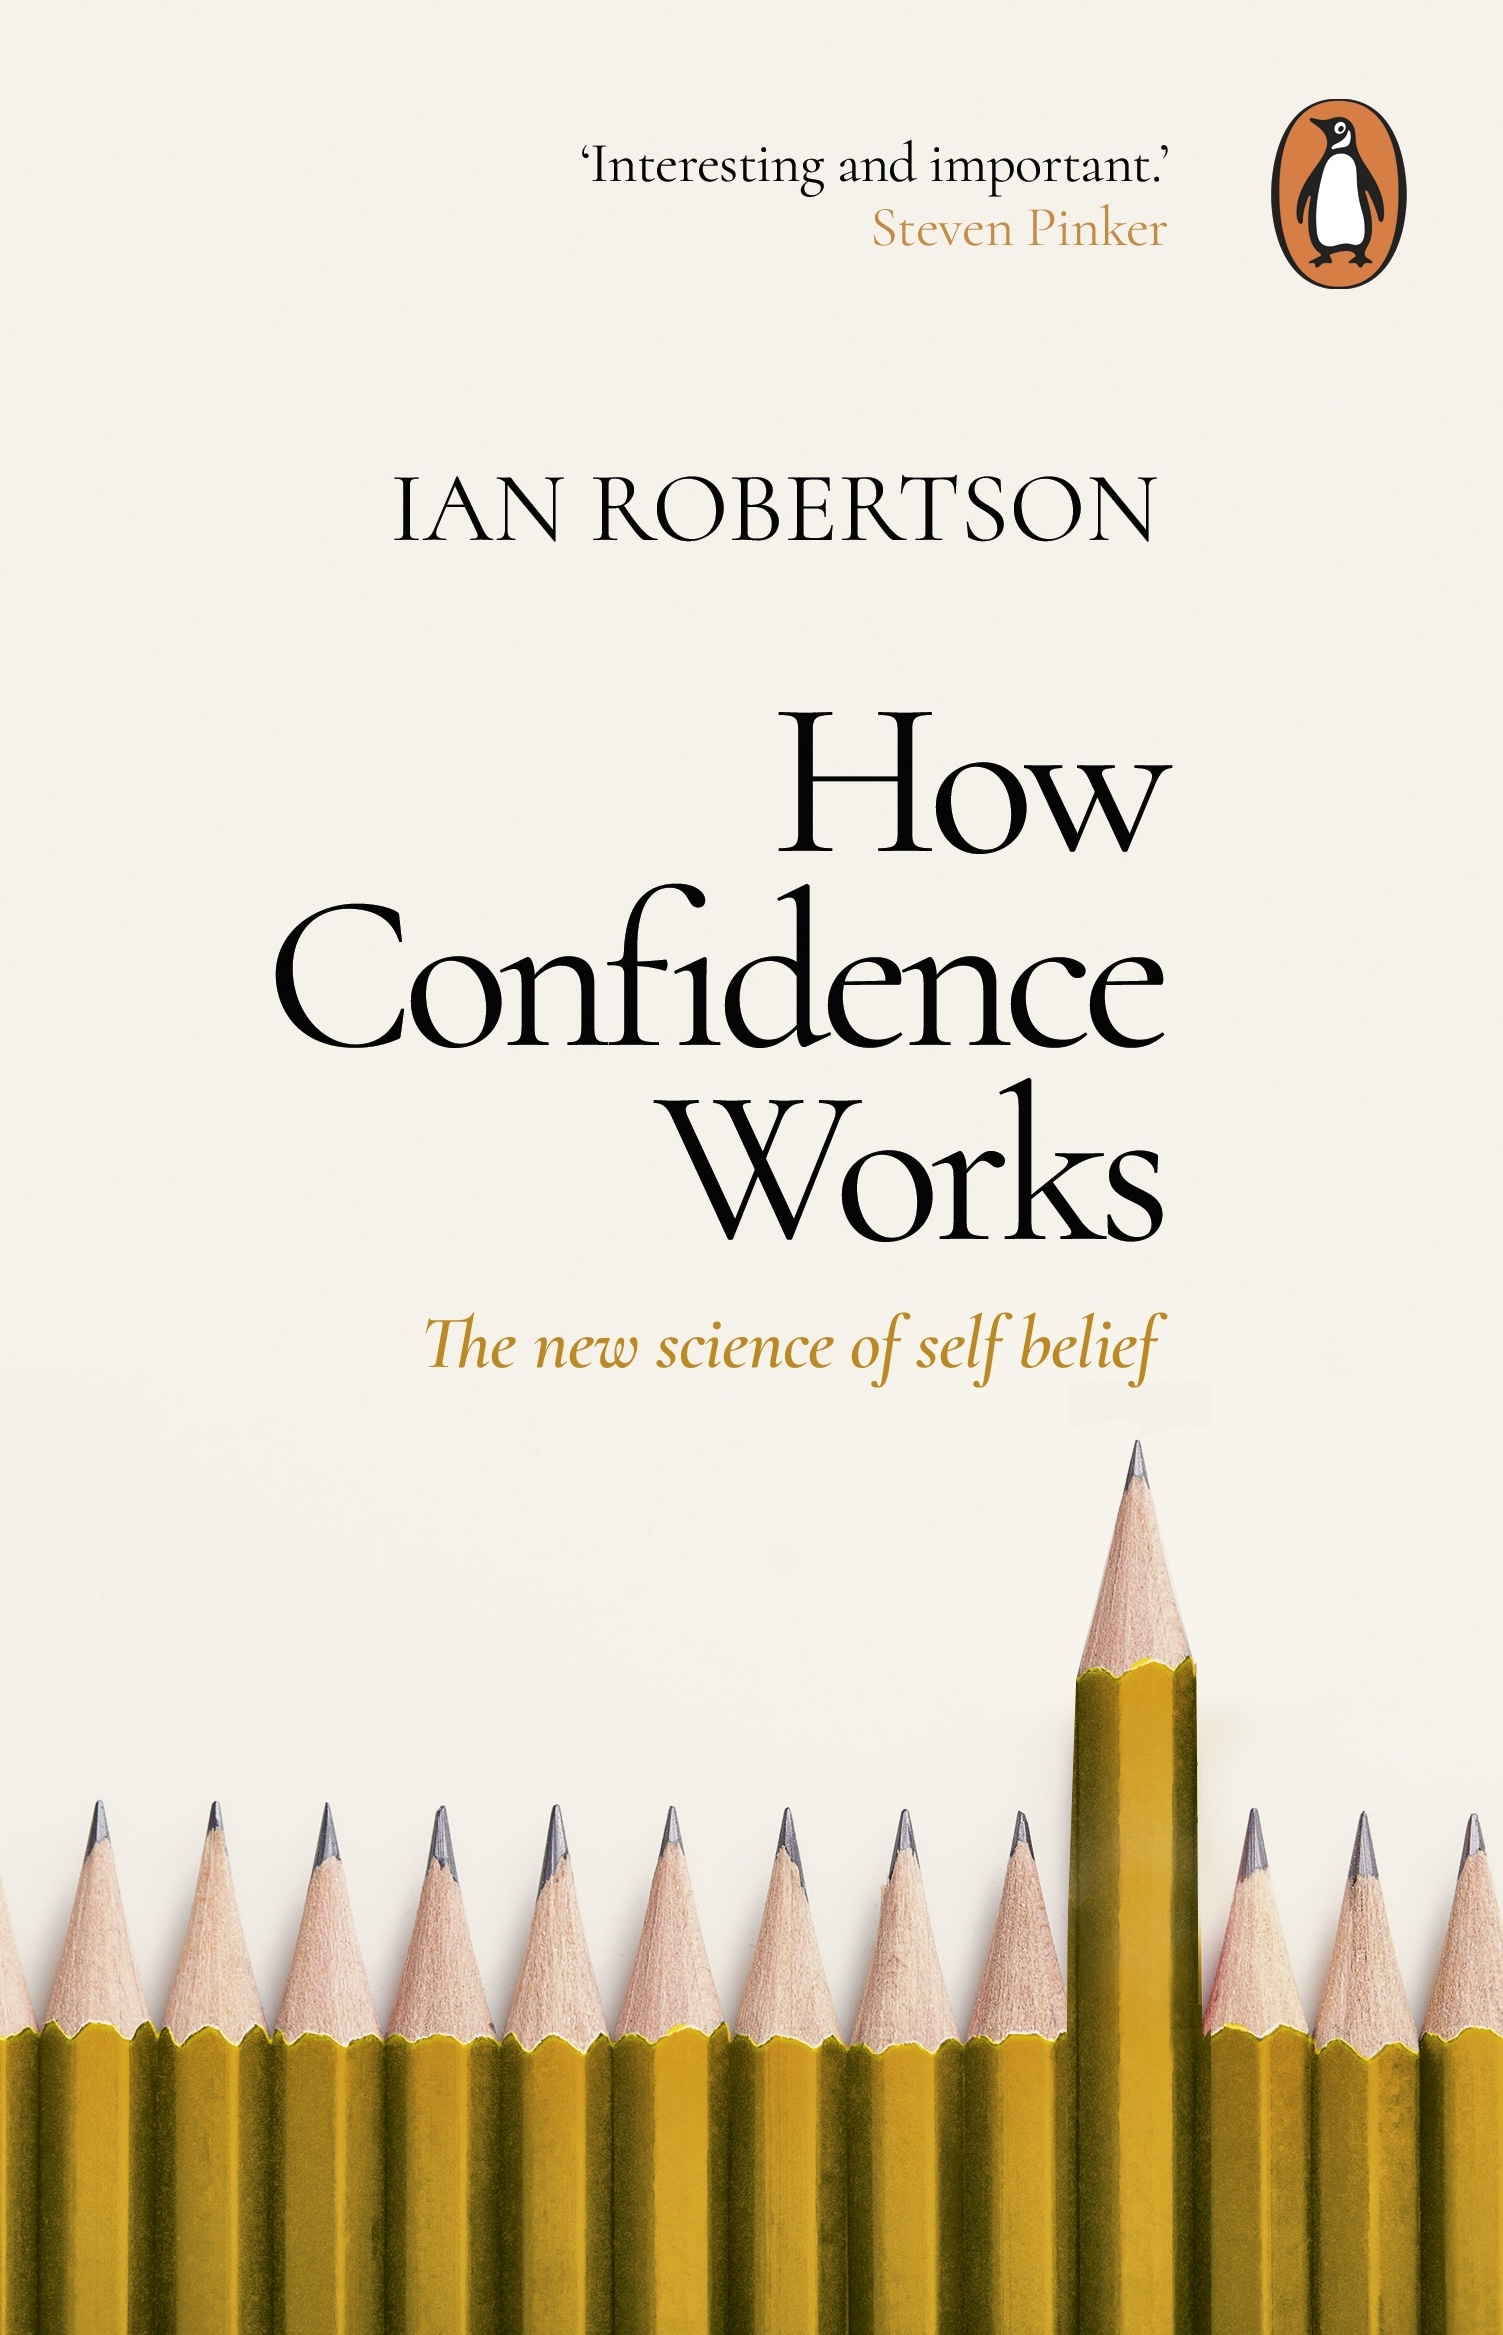 Book “How Confidence Works” by Ian Robertson — March 10, 2022